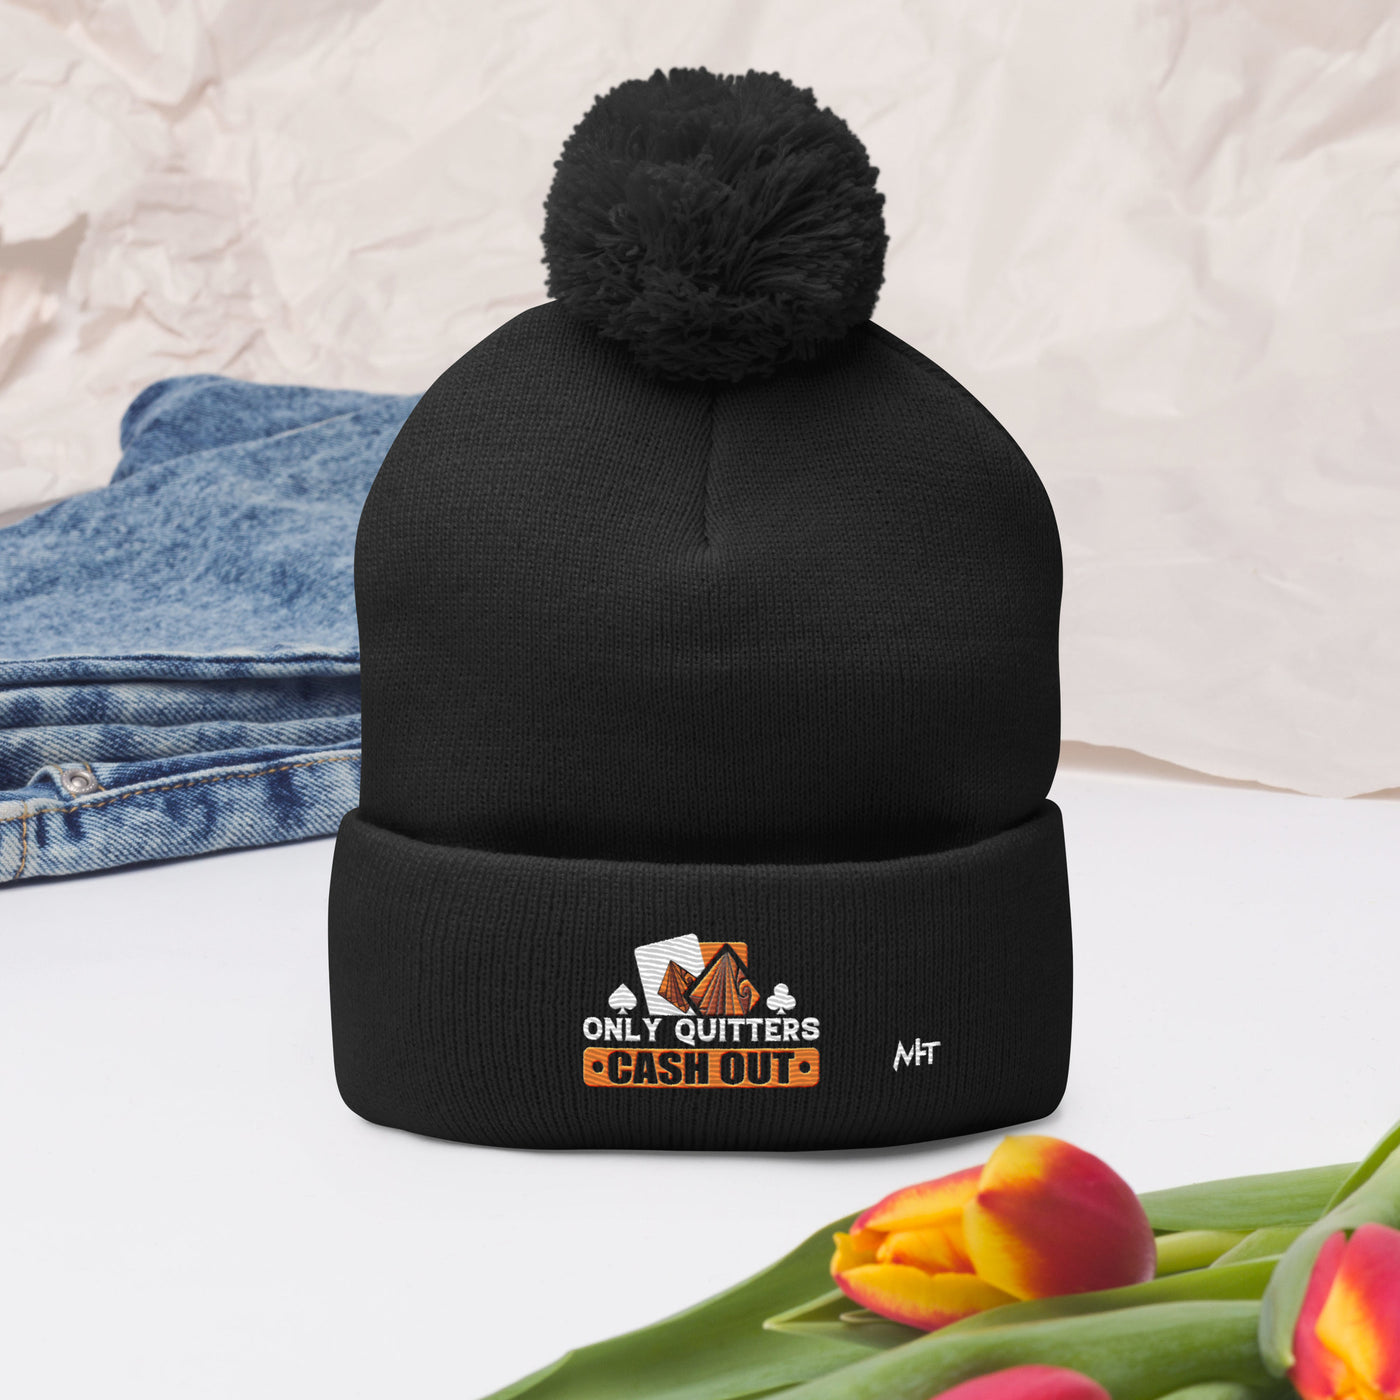 Only Quitters Cash Out - Pom-Pom Beanie